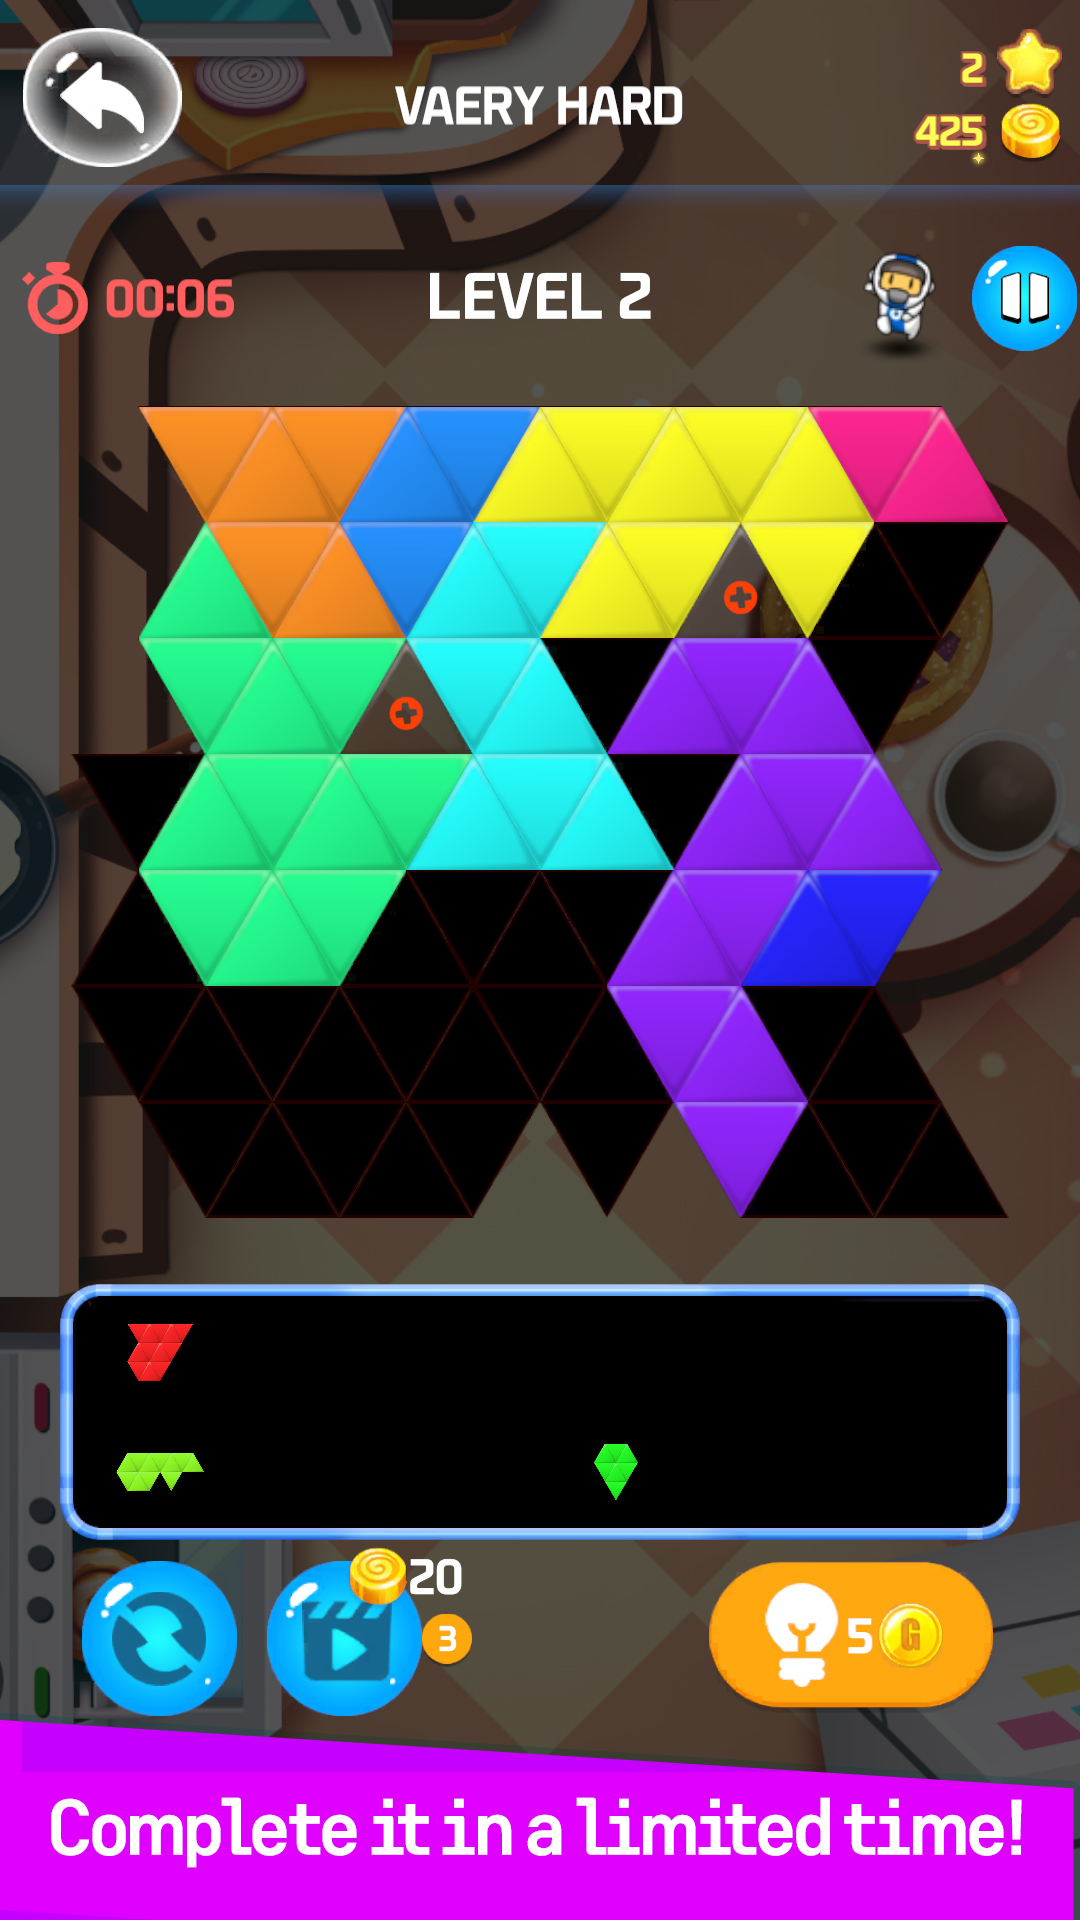 Puzzle TimeAttack - Android game screenshots.